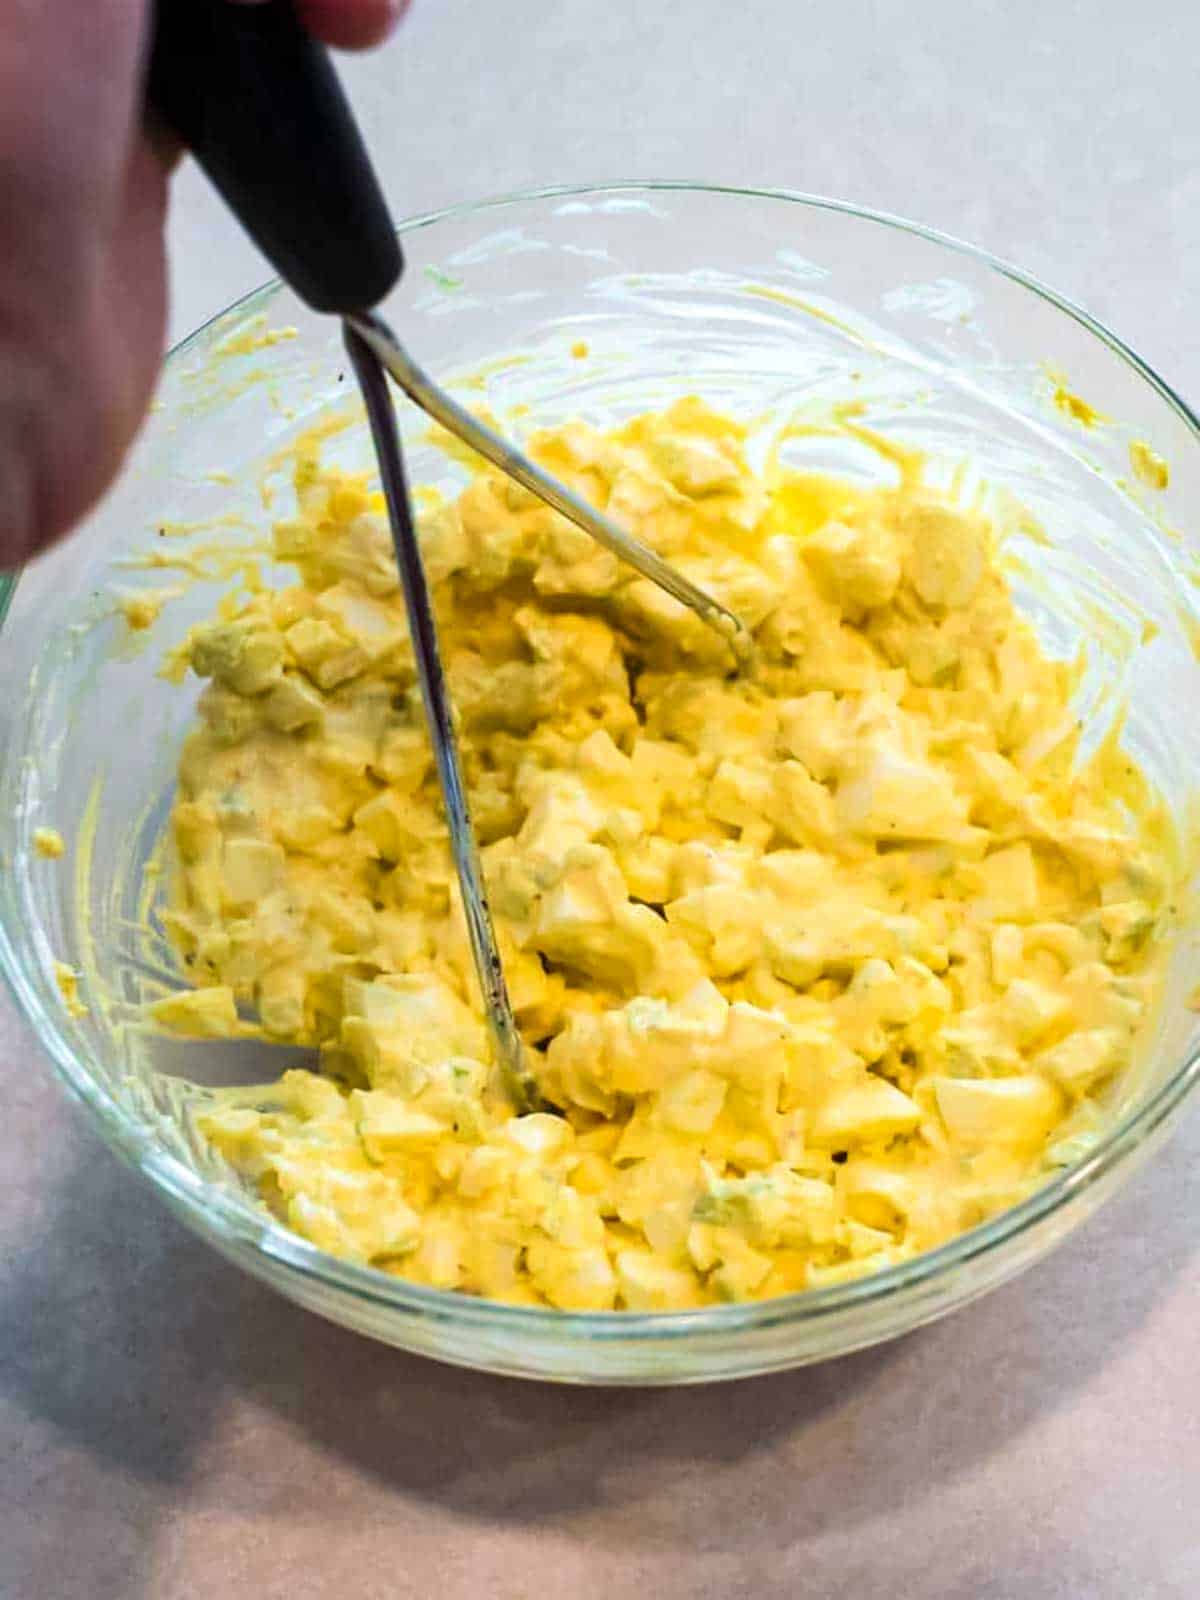 Using a potato masher to mix all of the egg salad ingredients together.